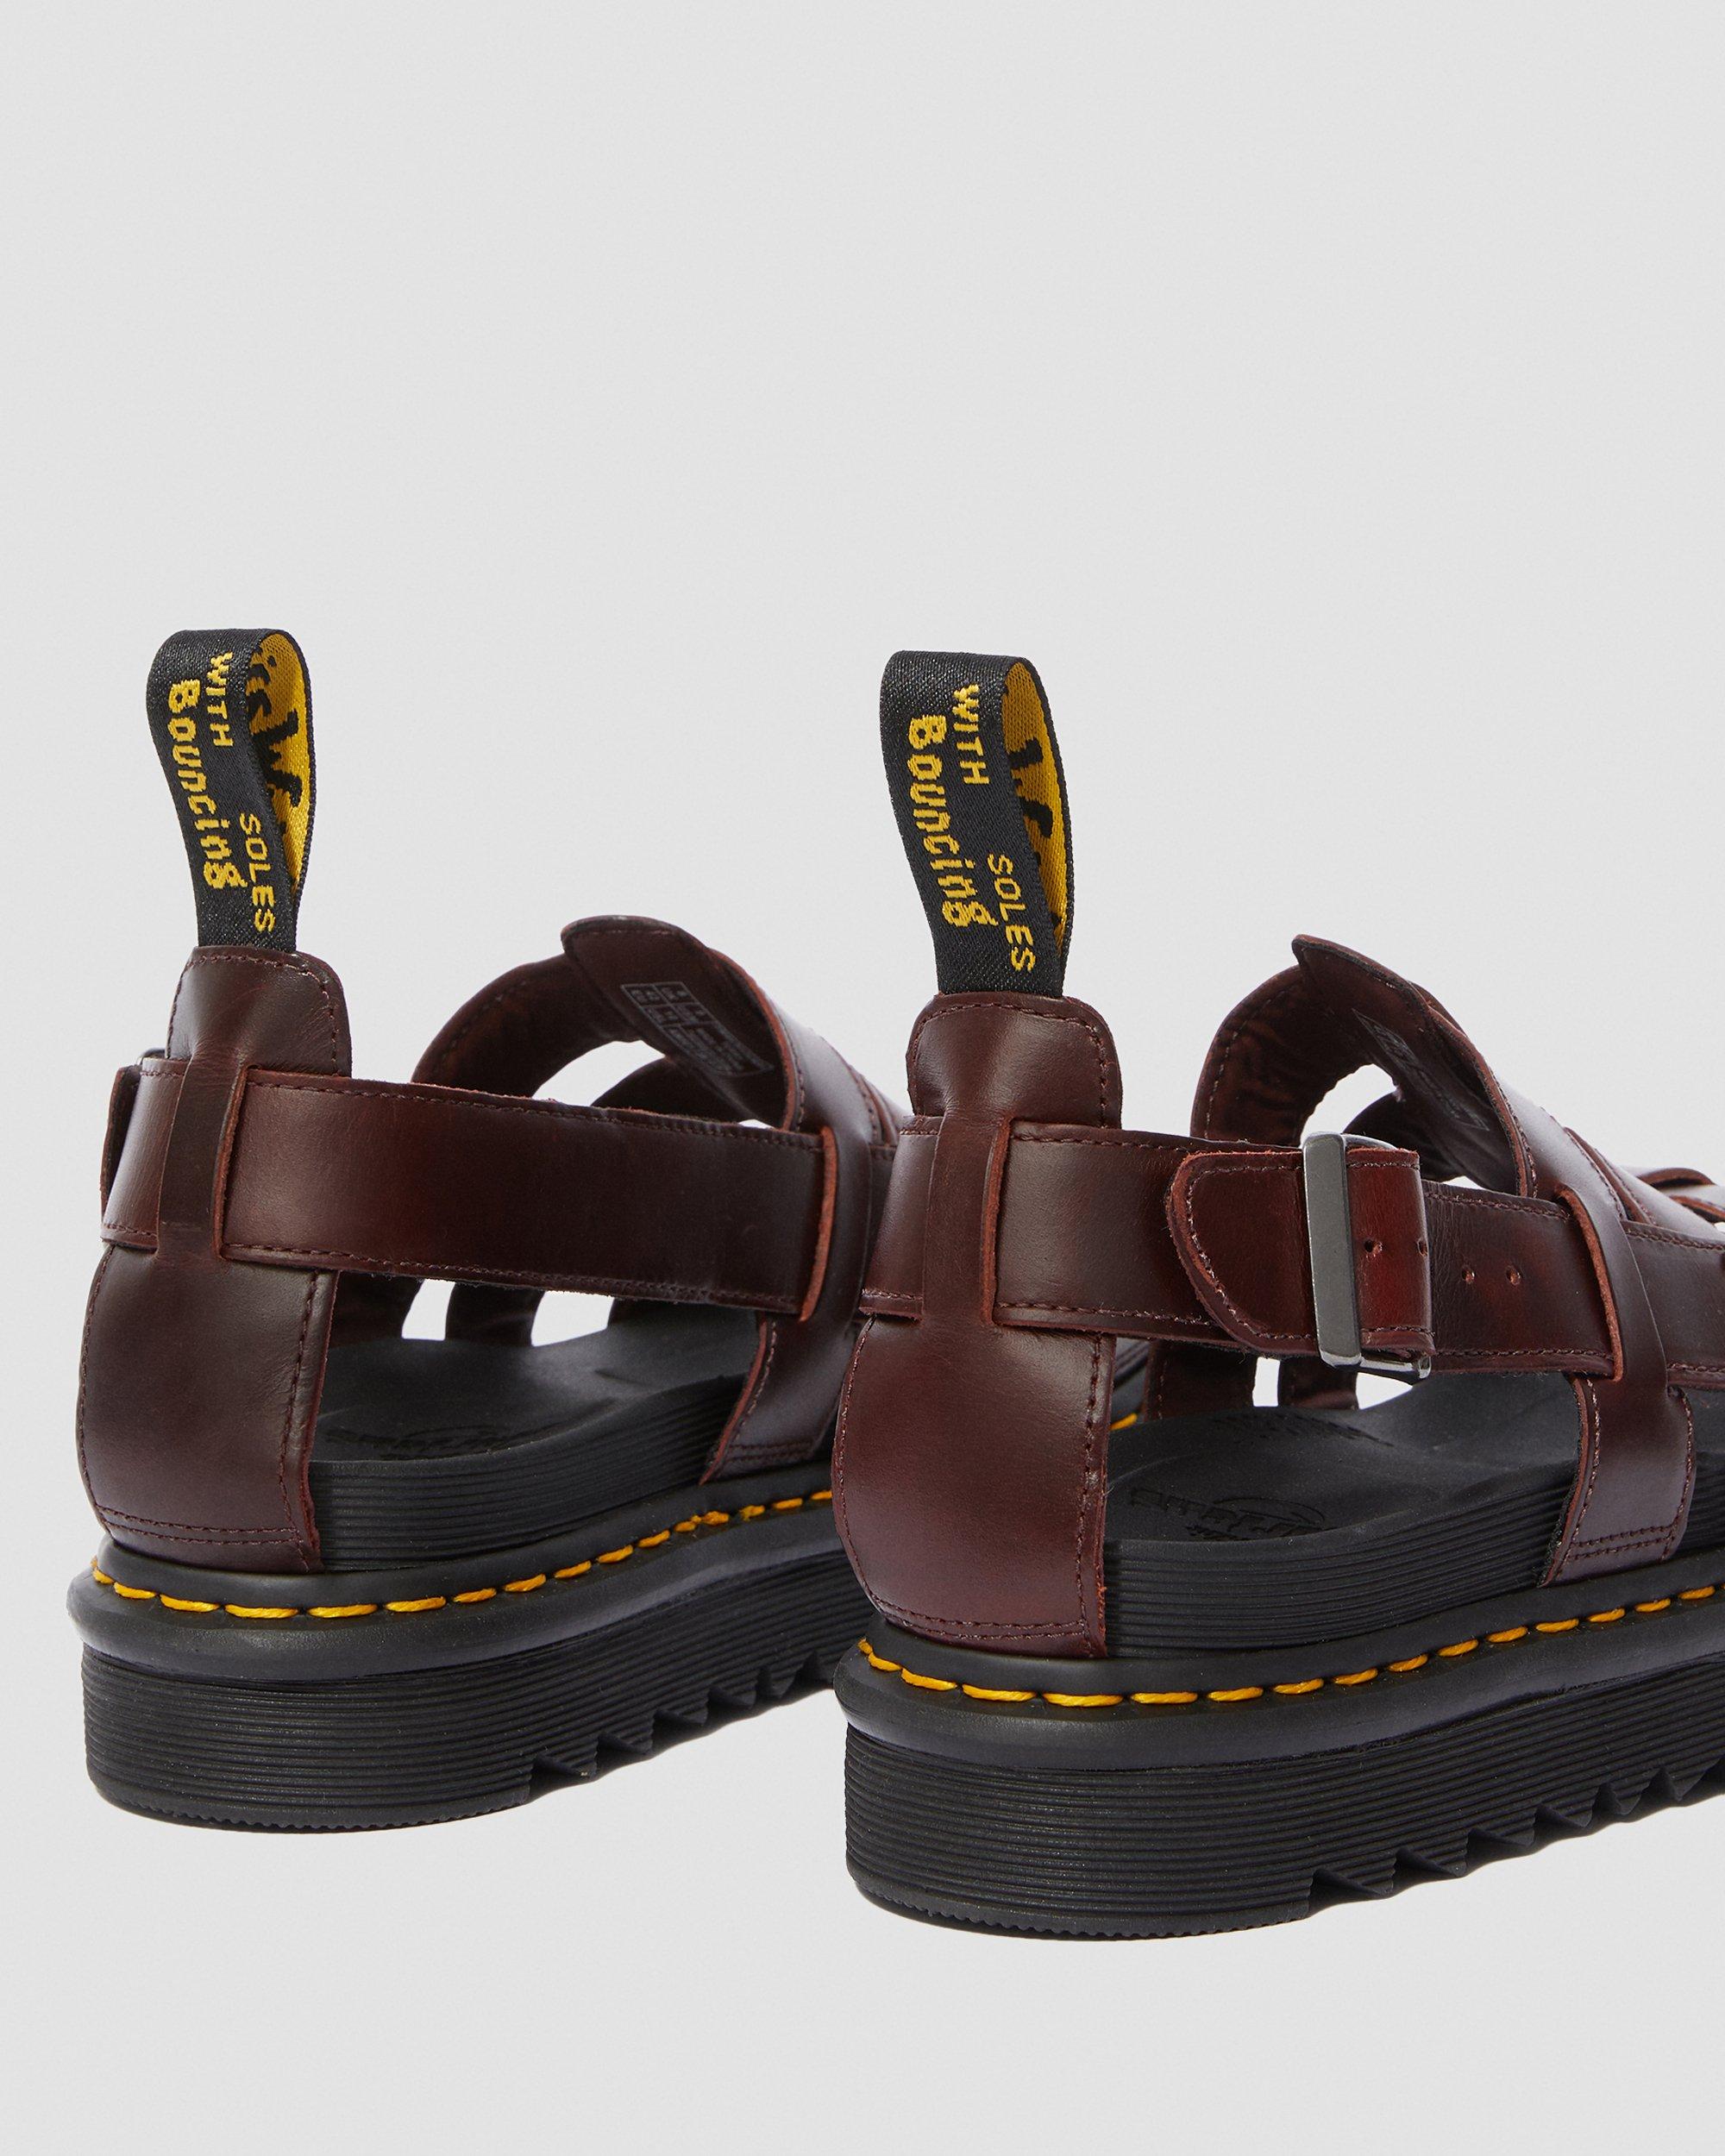 TERRY LEATHER SANDALS Dr. Martens